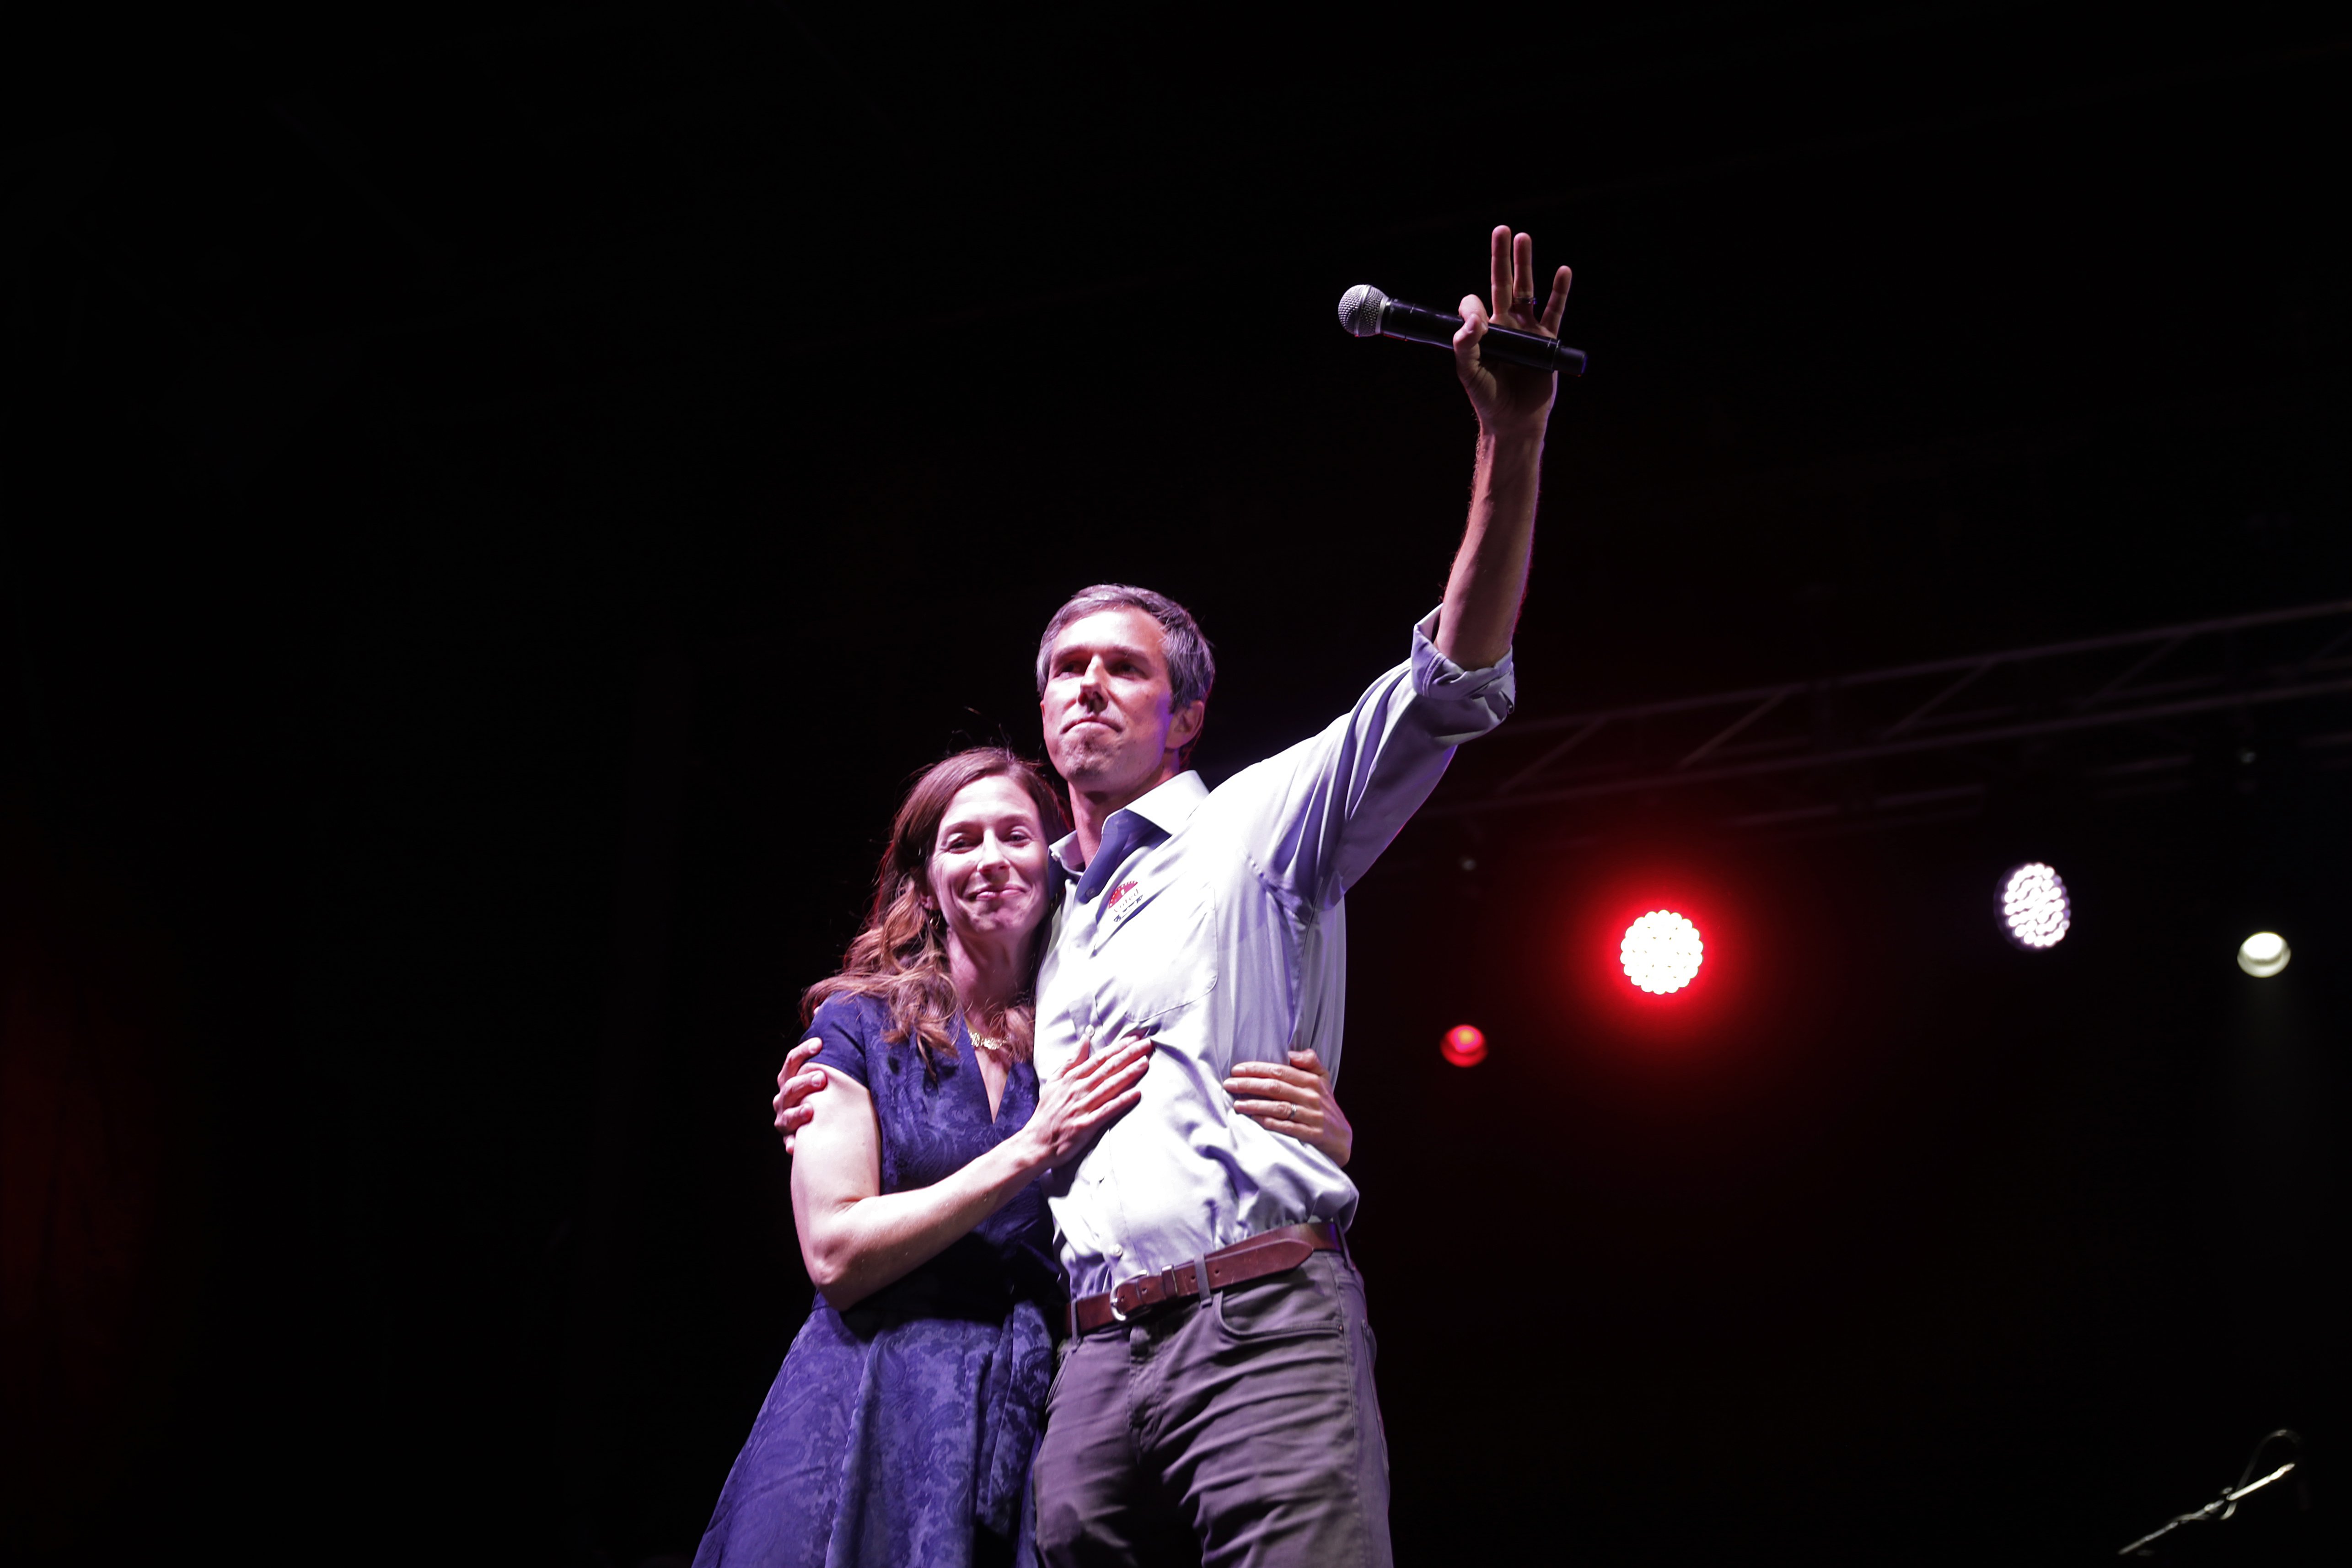 U.S. Senate candidate Rep. Beto O'Rourke (D-TX) and his wife Amy Sanders says goodbye to supporters while addressing a 'thank you' party on Election Day at Southwest University Park November 06, 2018 in El Paso, Texas. O'Rourke lost to incumbent Sen. Ted Cruz (R-TX). (Chip Somodevilla/Getty Images)